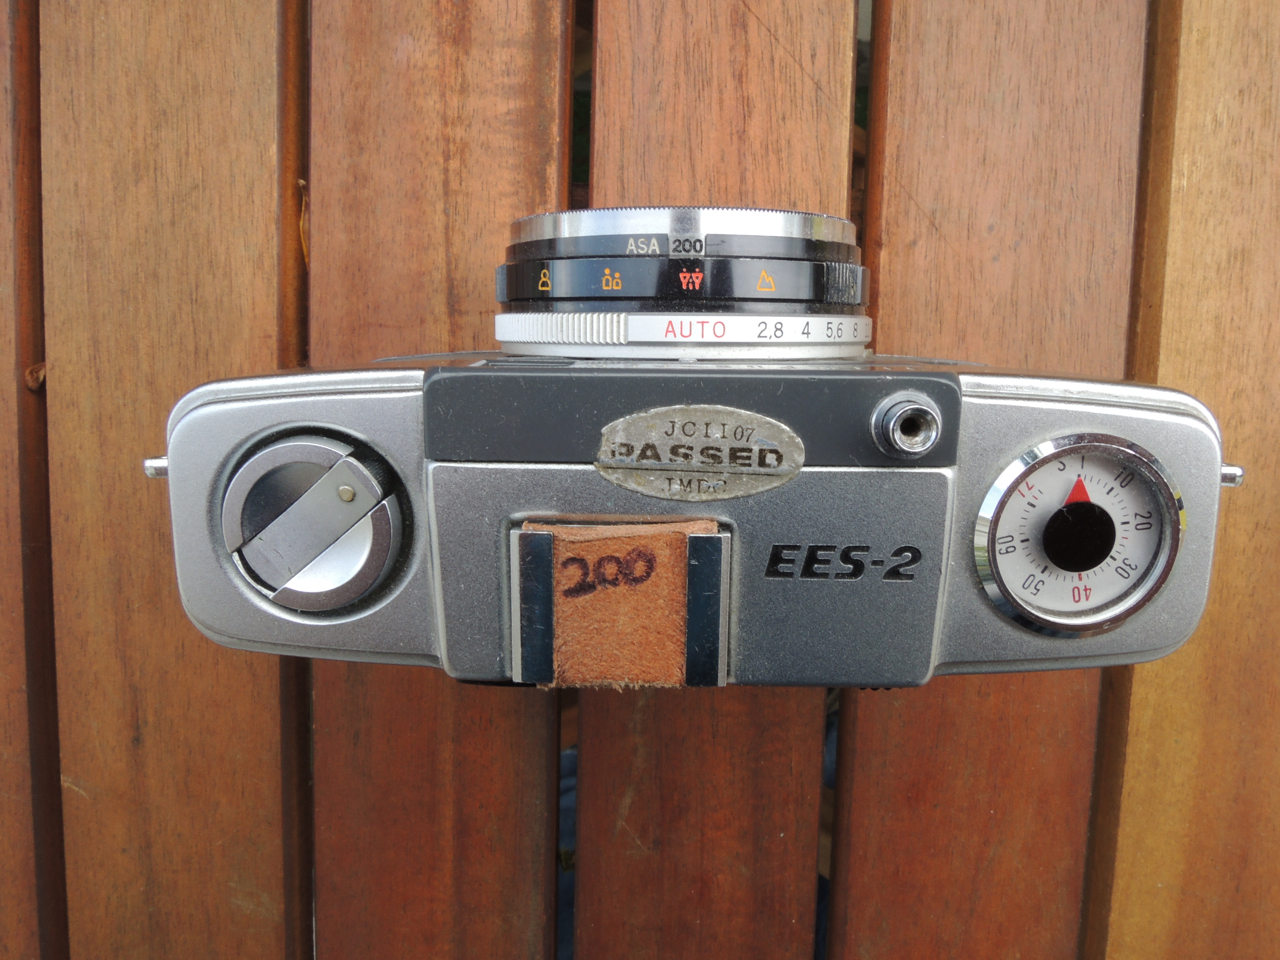 The Olympus PEN EES-2 – All my cameras